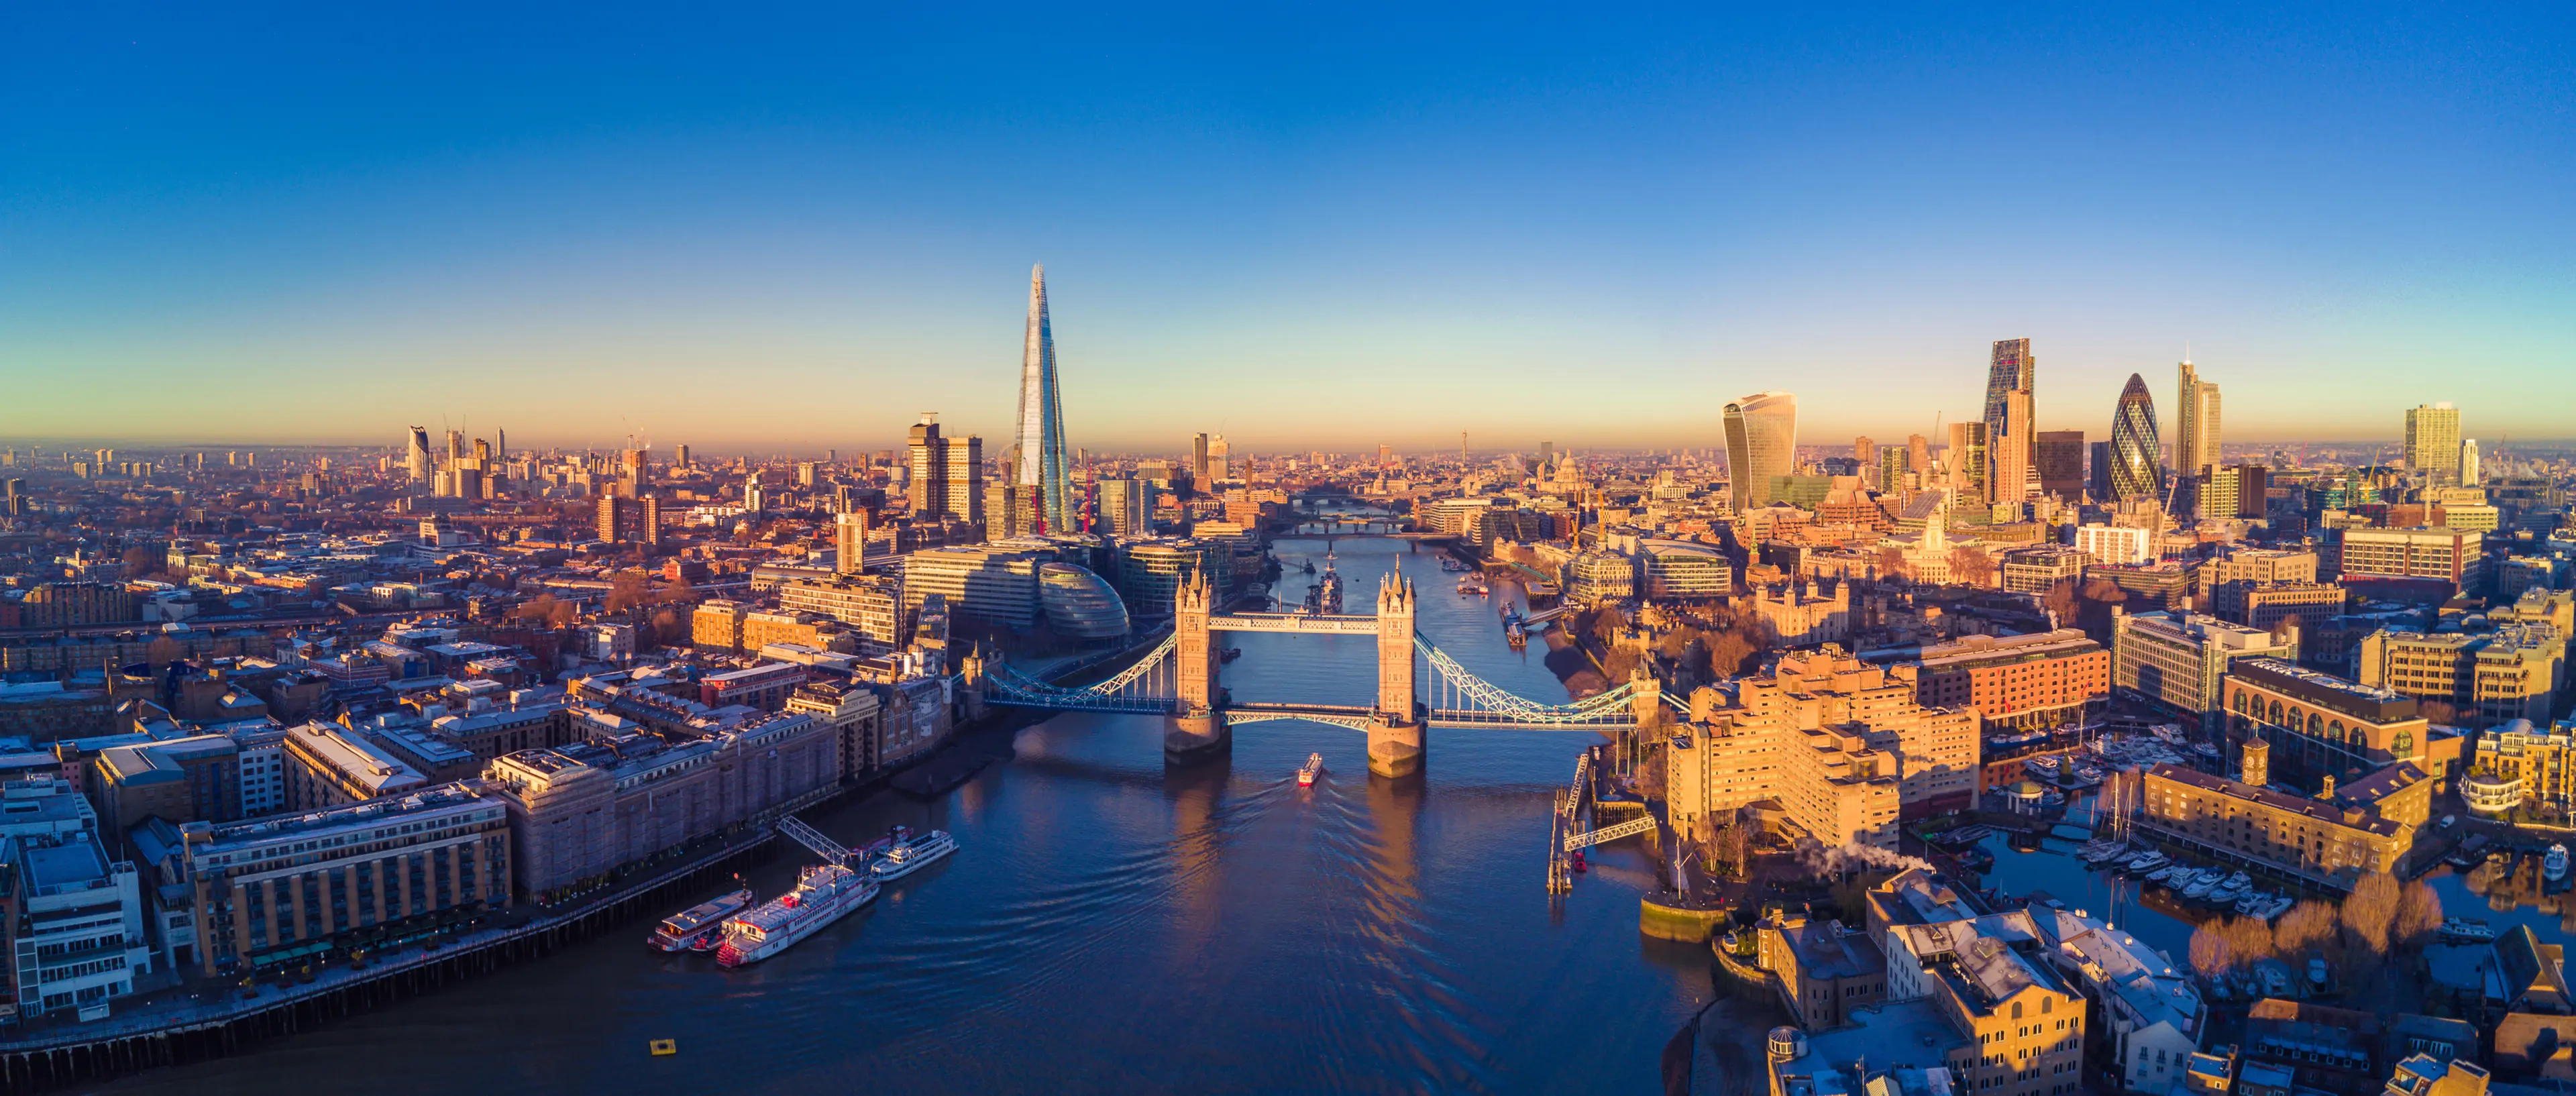 4-Day London Adventure: Sightseeing, Culinary Delights & Nightlife with Friends